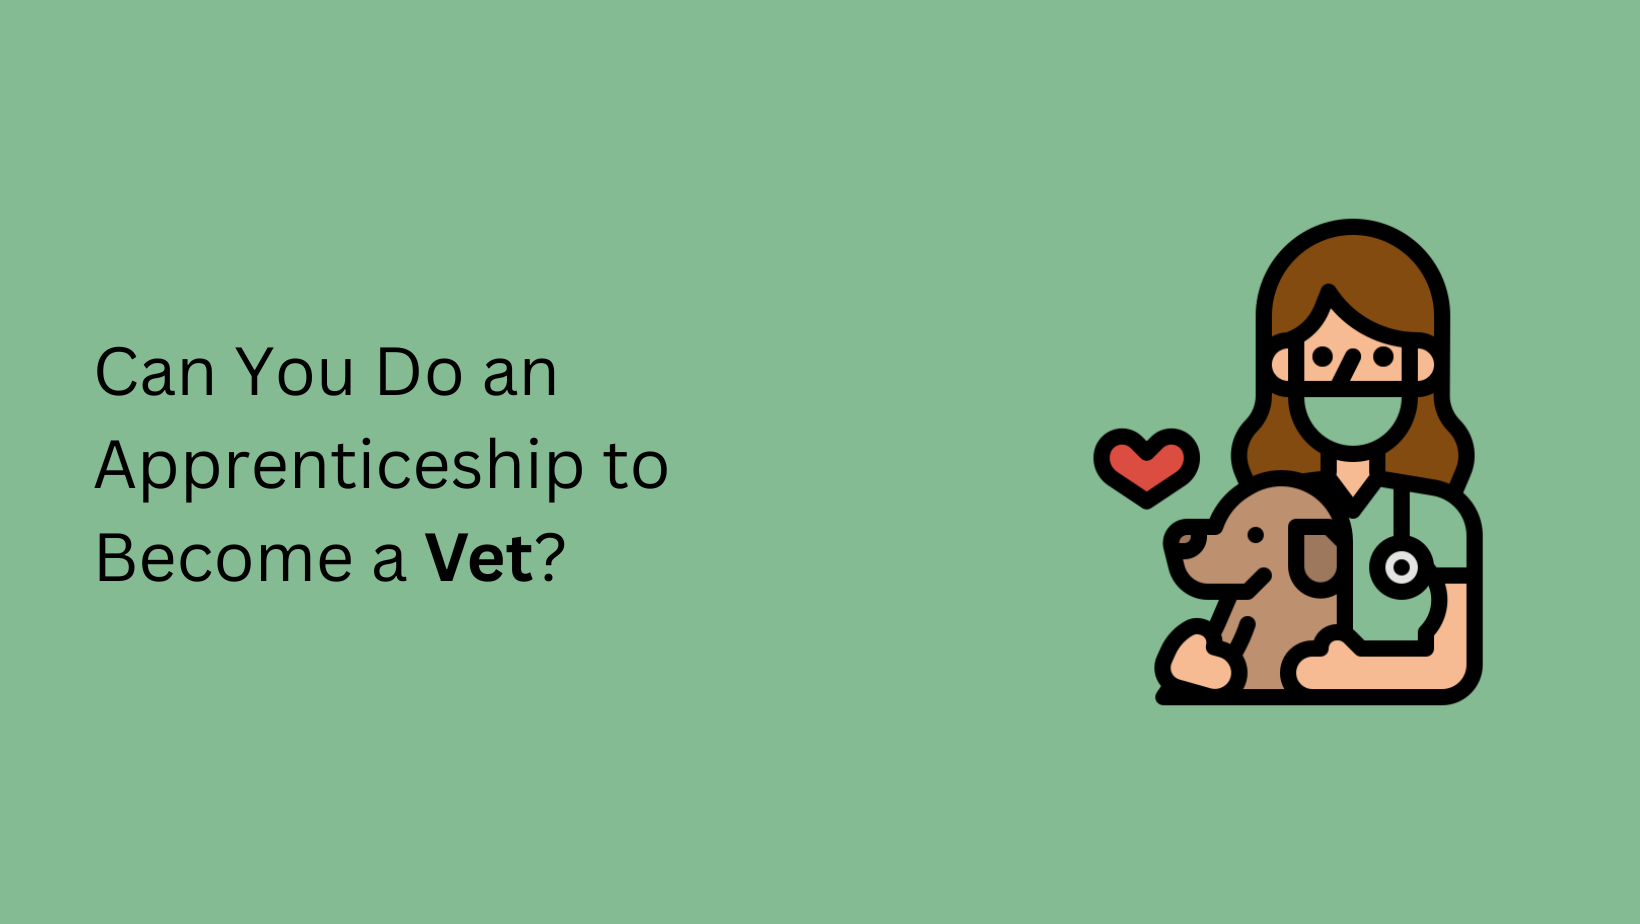 Can You Do an Apprenticeship to Become a Vet